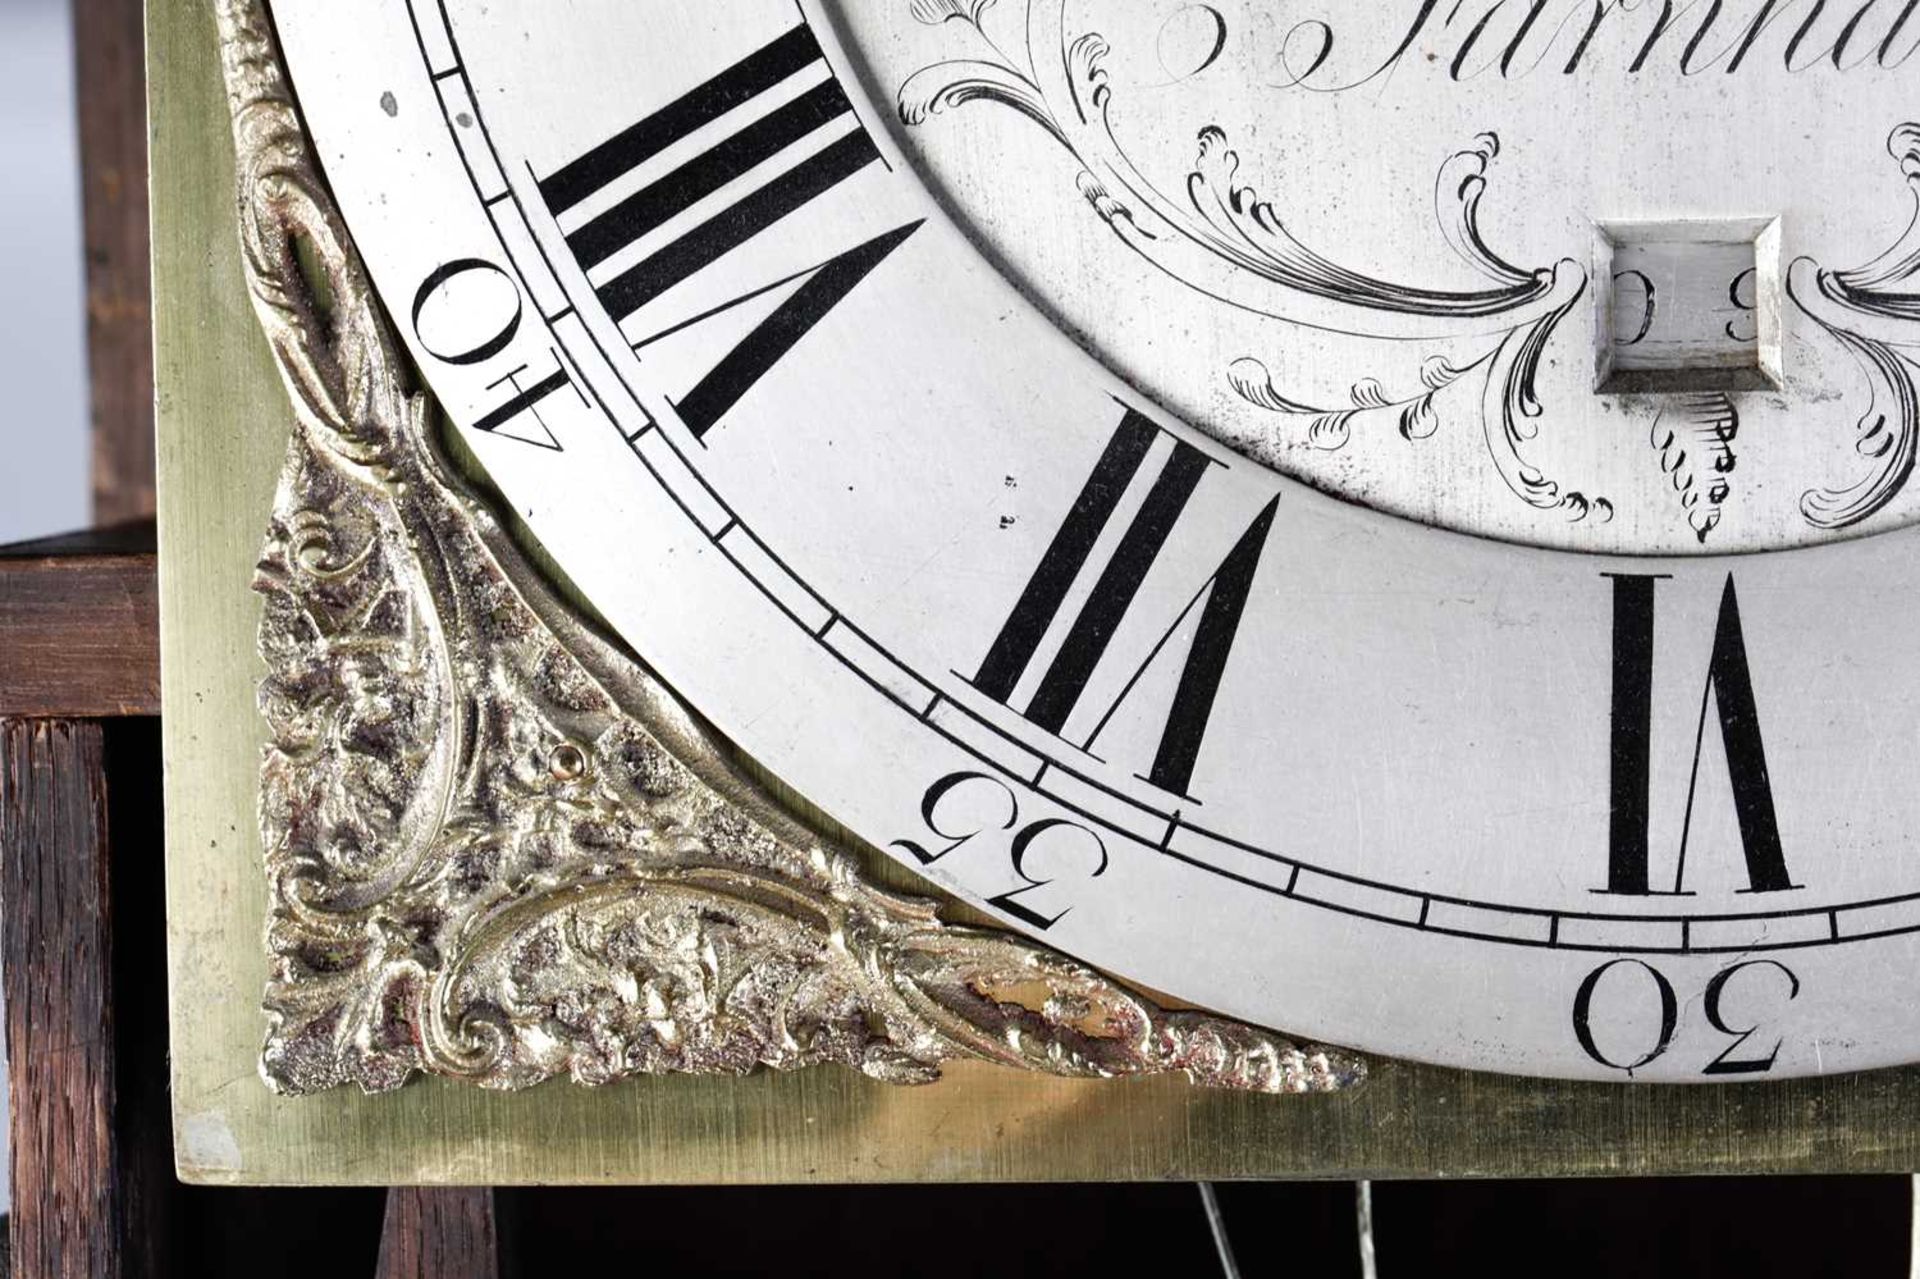 Philip Avenalll (II) of Farnham (Surrey); A George III oak-cased 8-day longcase clock, fitted with a - Image 13 of 19